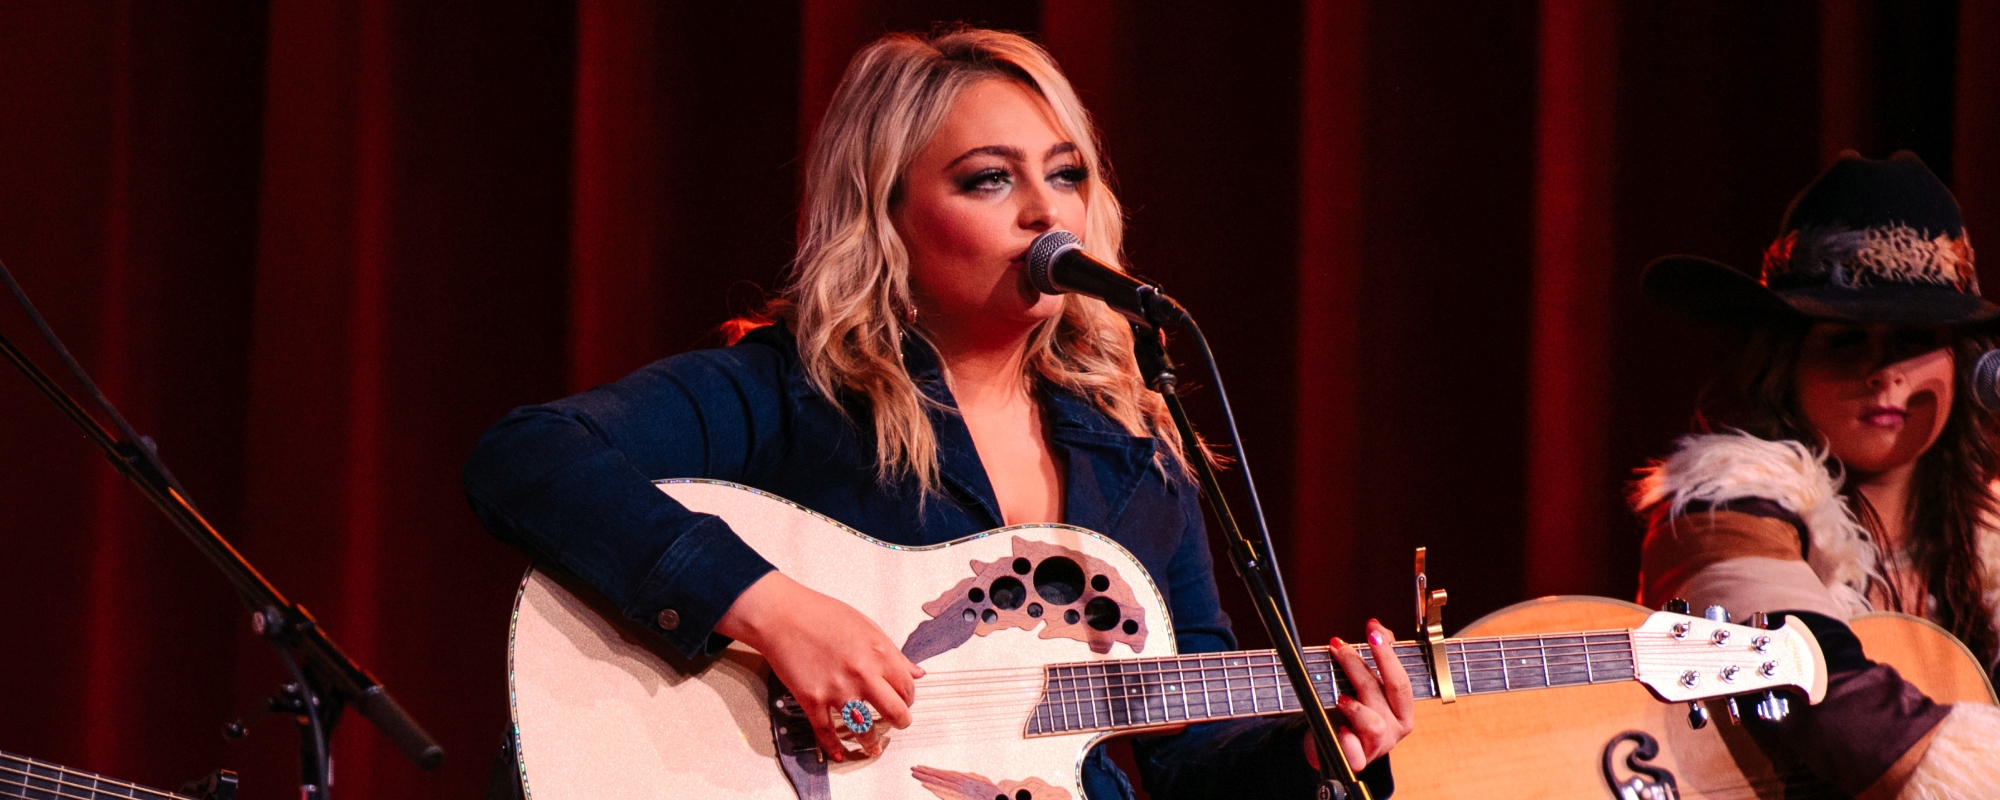 ‘American Idol’ Alum HunterGirl Tears Up at Debut Grand Ole Opry Performance: “It Was a Full-Circle Moment”